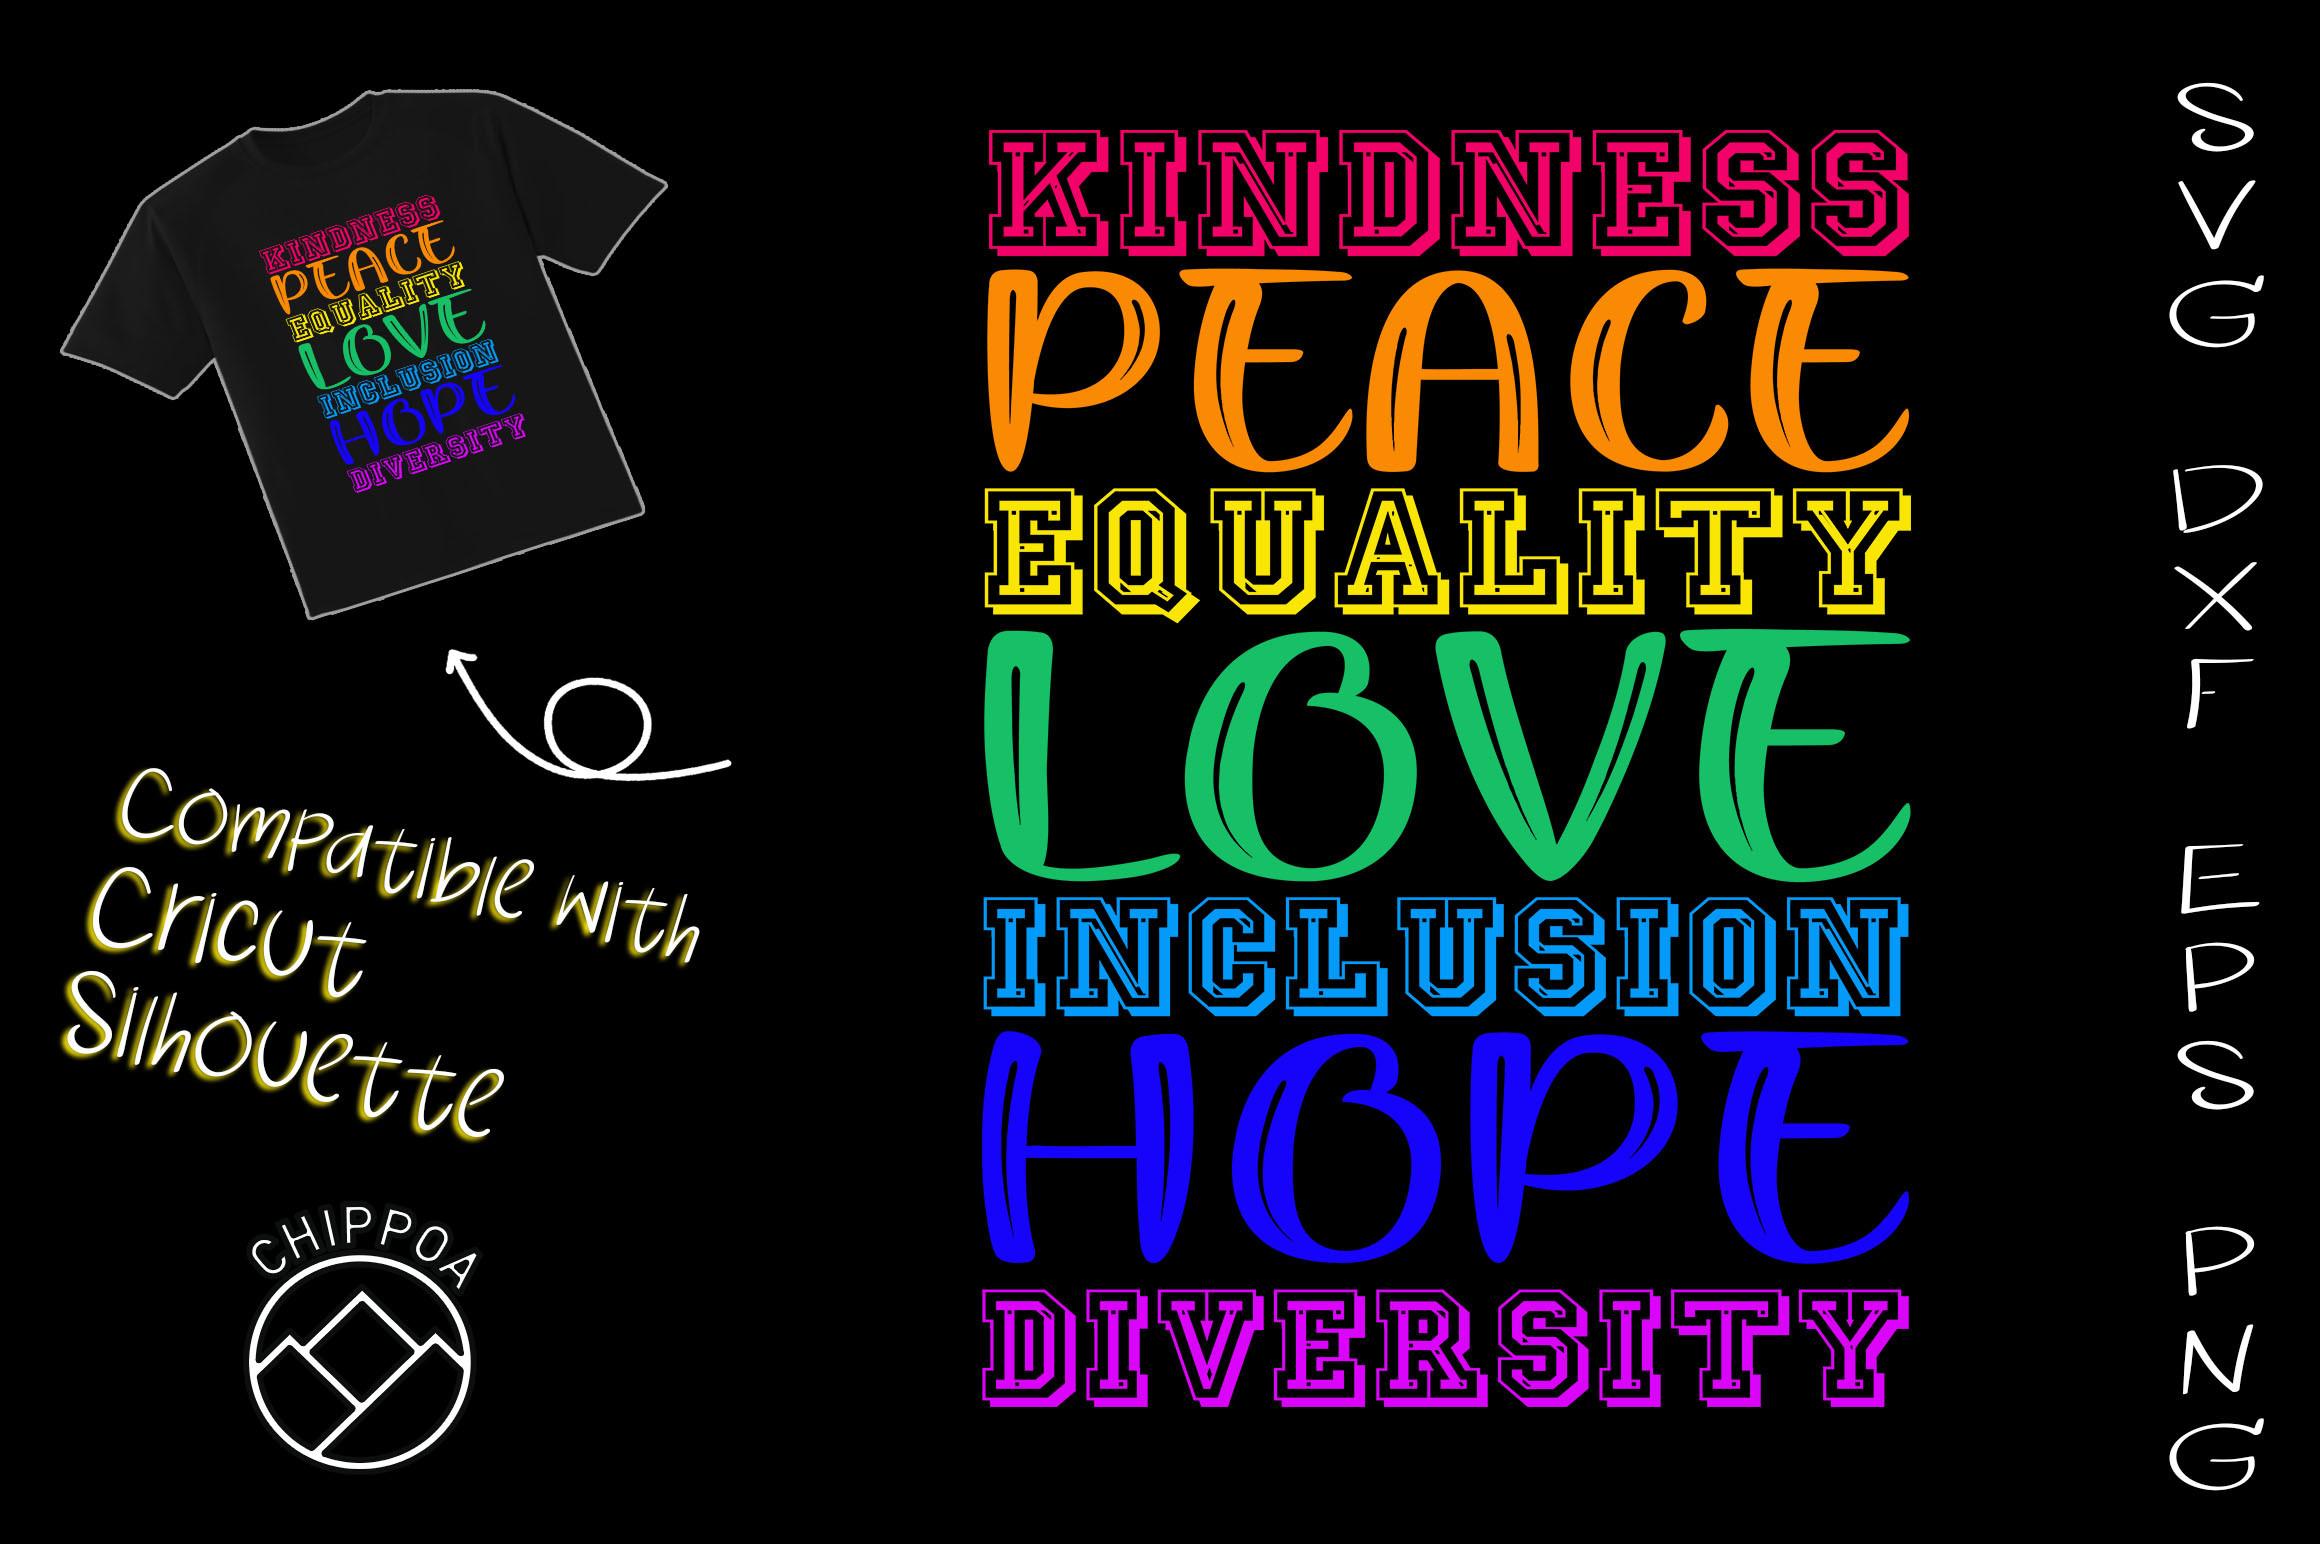 Kindness Peace Equality Inclusion BLM